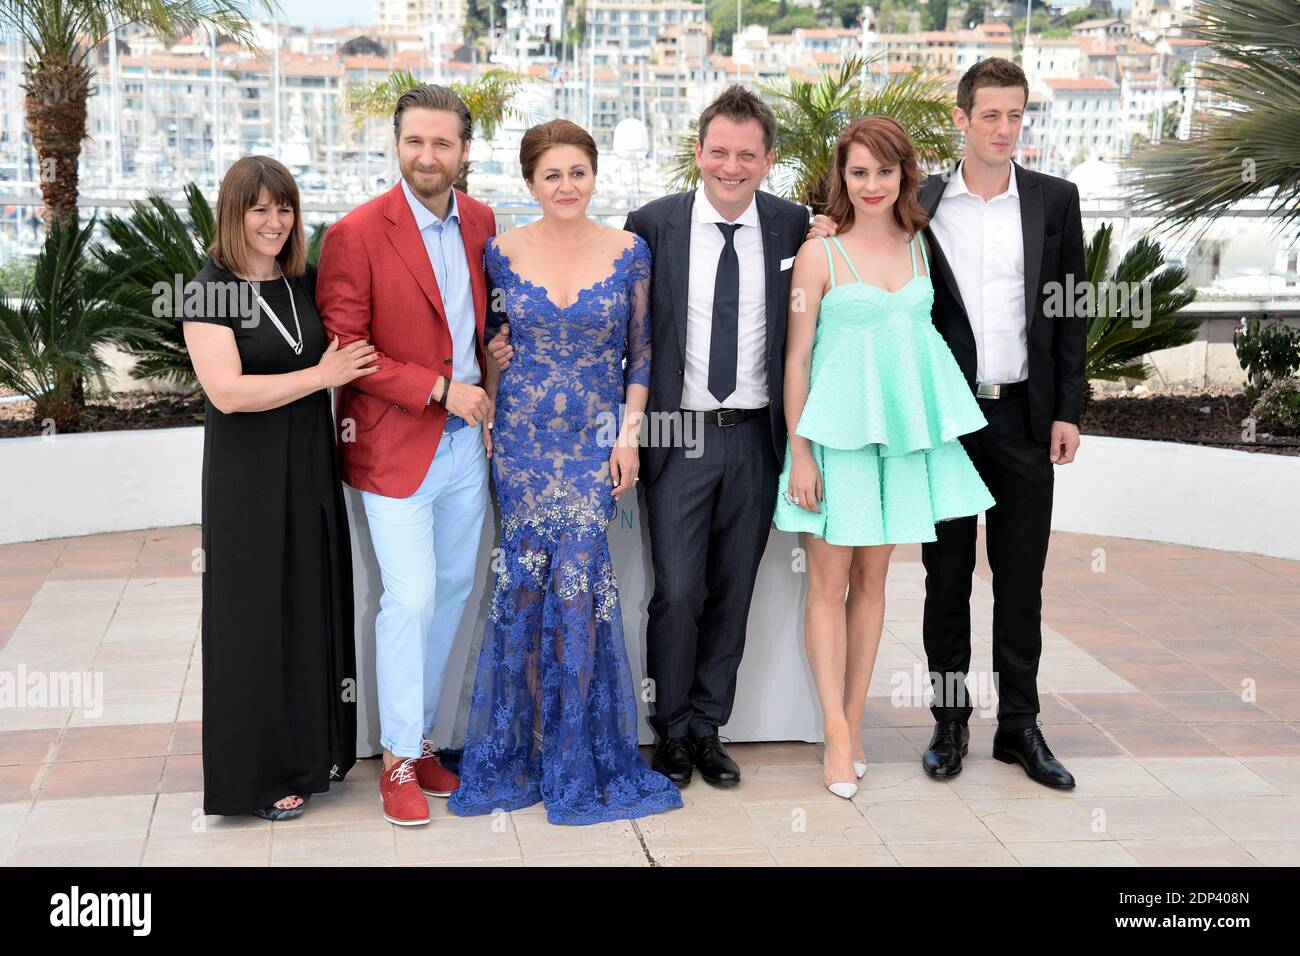 Nives Ivankovic, Dalibor Matanic, Tihana Lazovic and Dado Cosic posing at the photocall for the film Zvidan as part of the 68th Cannes Film Festival in Cannes, France on May 17, 2015. Photo by Nicolas Briquet/ABACAPRESS.COM Stock Photo